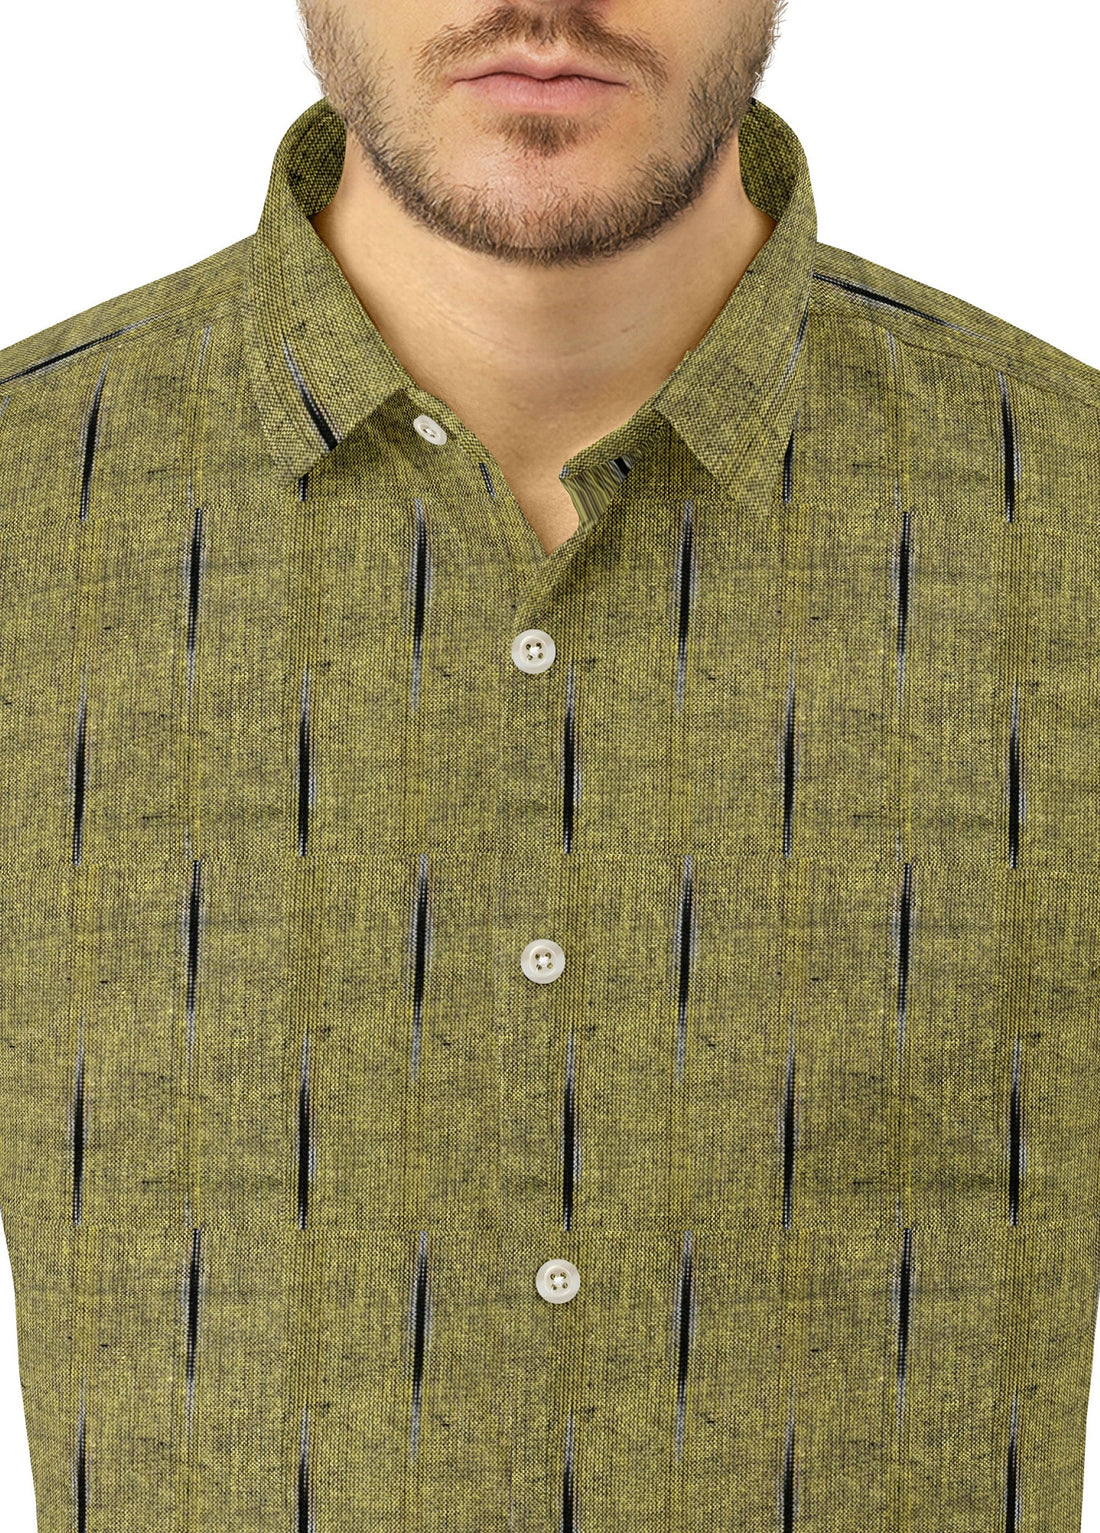 Ikat Shirts - Comfort in Style